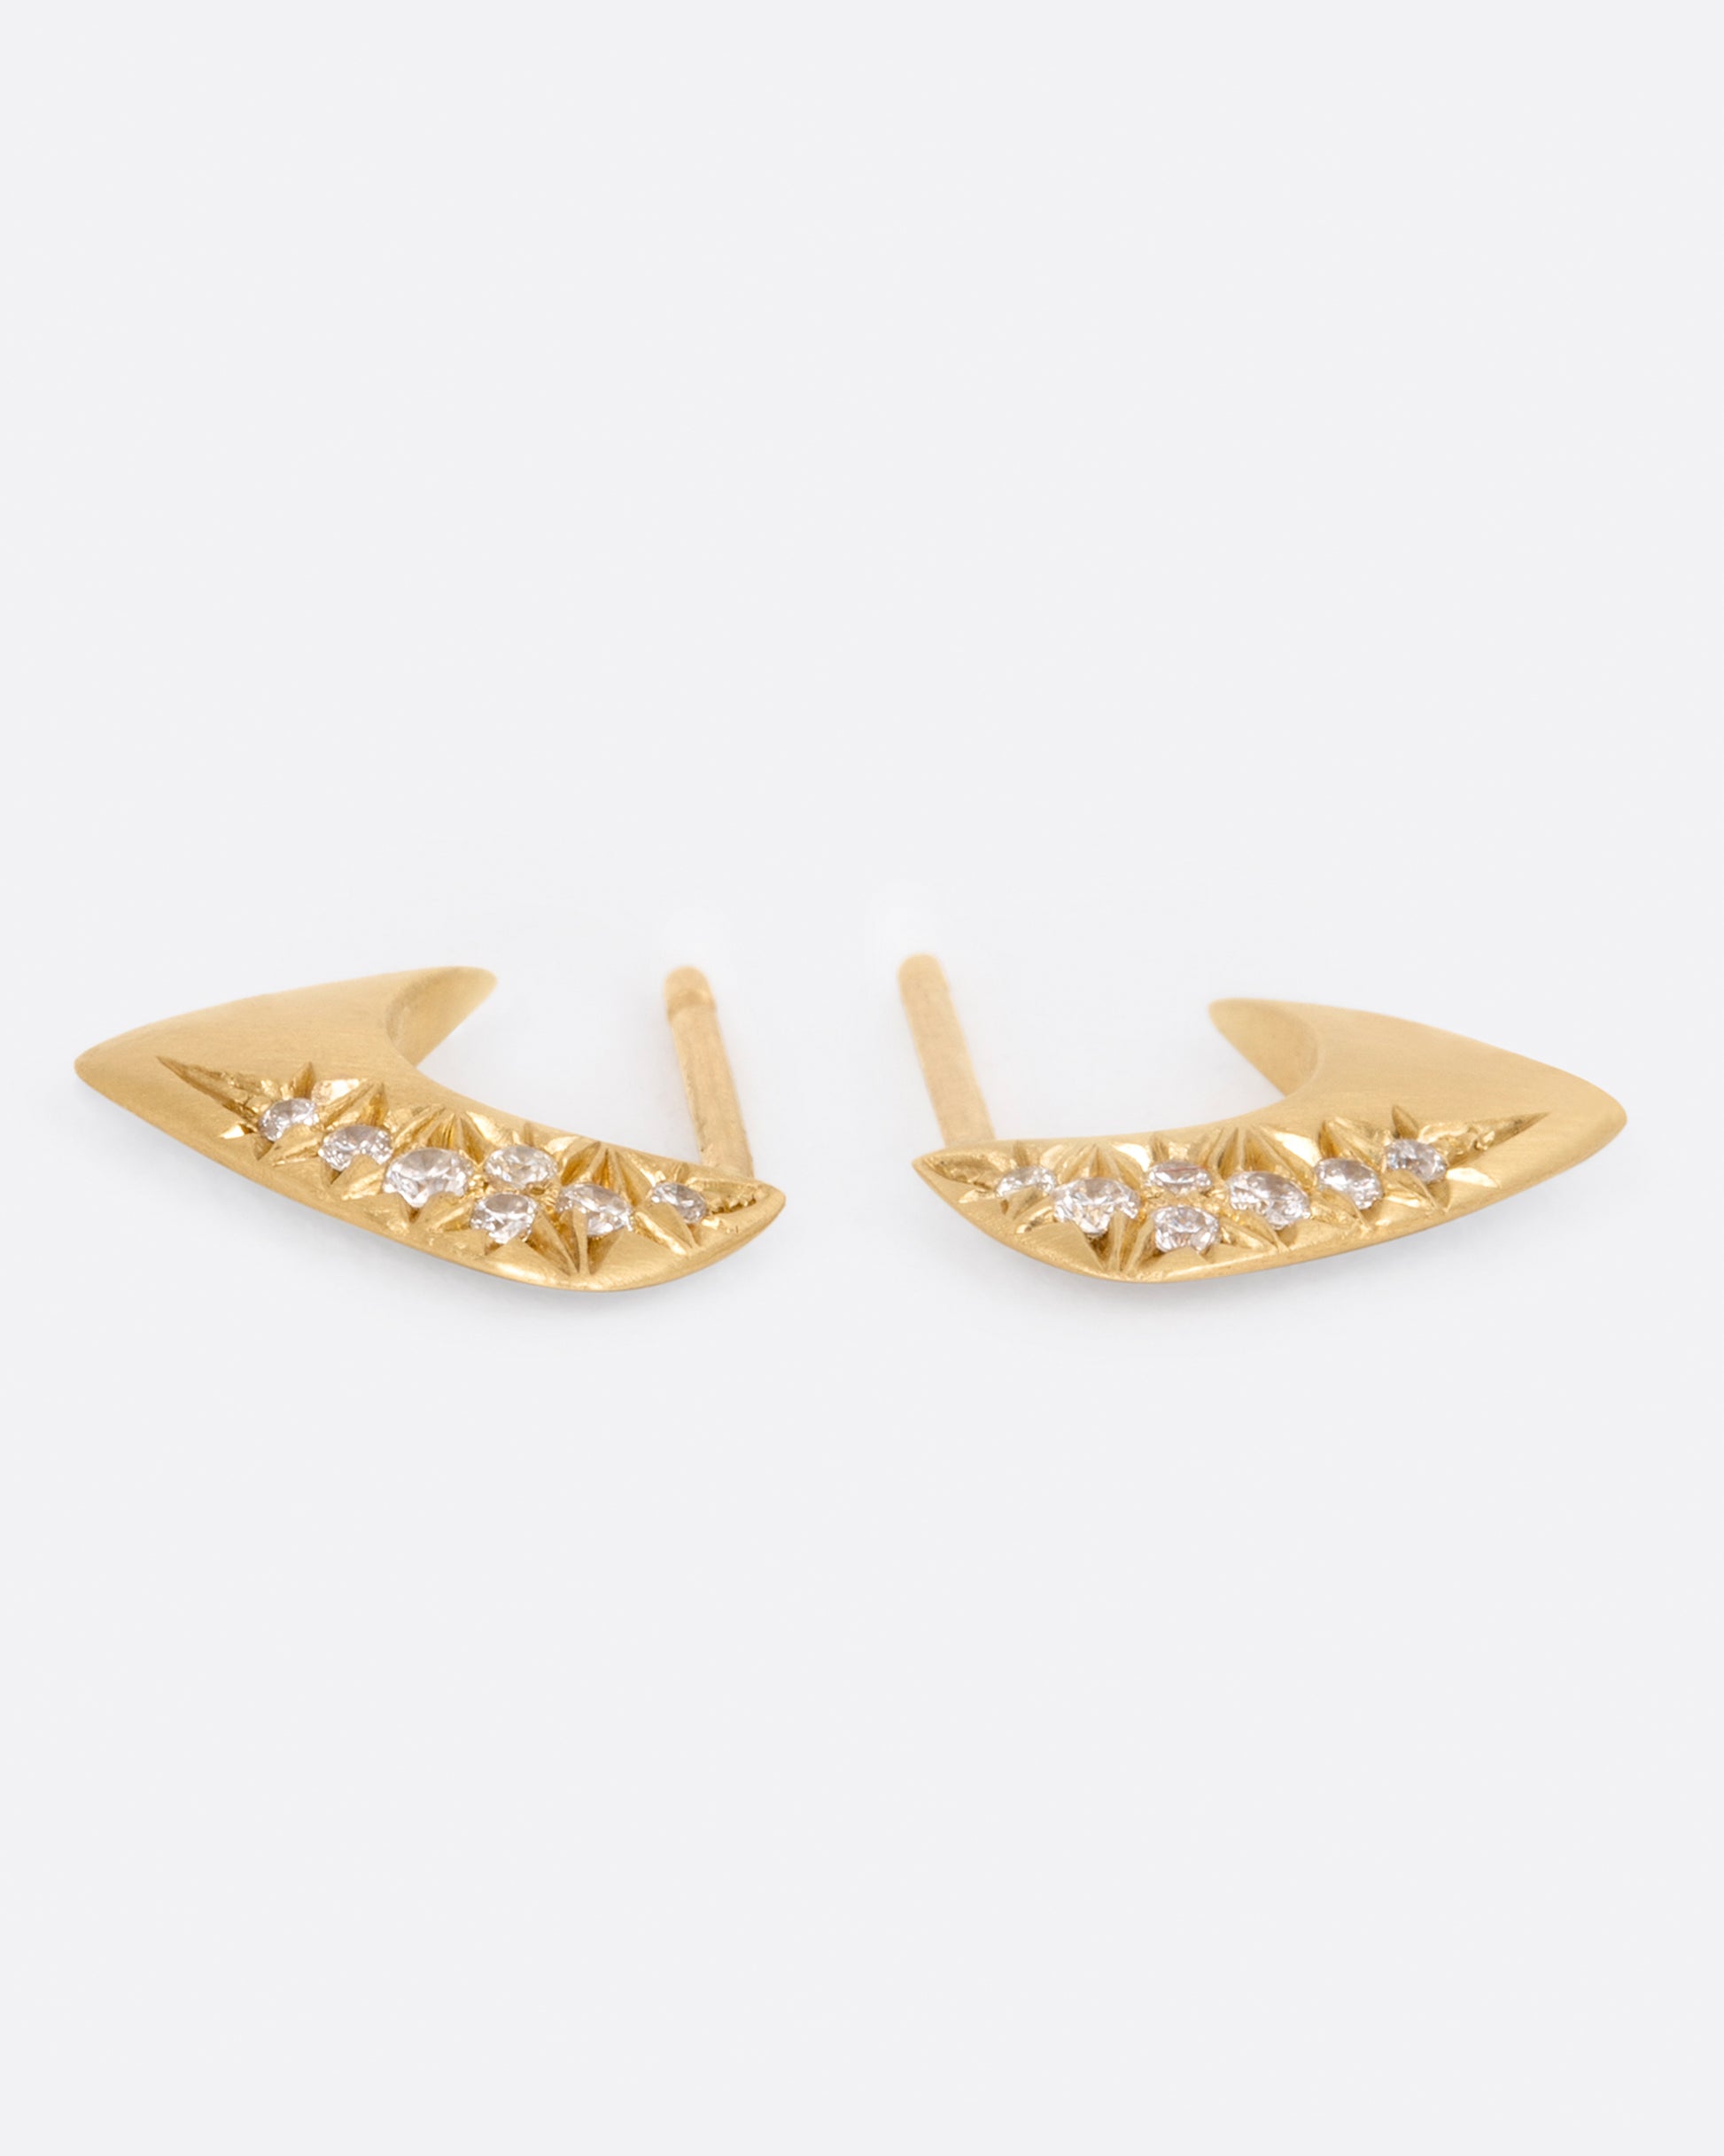 A pair of angular huggie hoop earrings with round pave diamonds on the outside of each, shown laying flat.